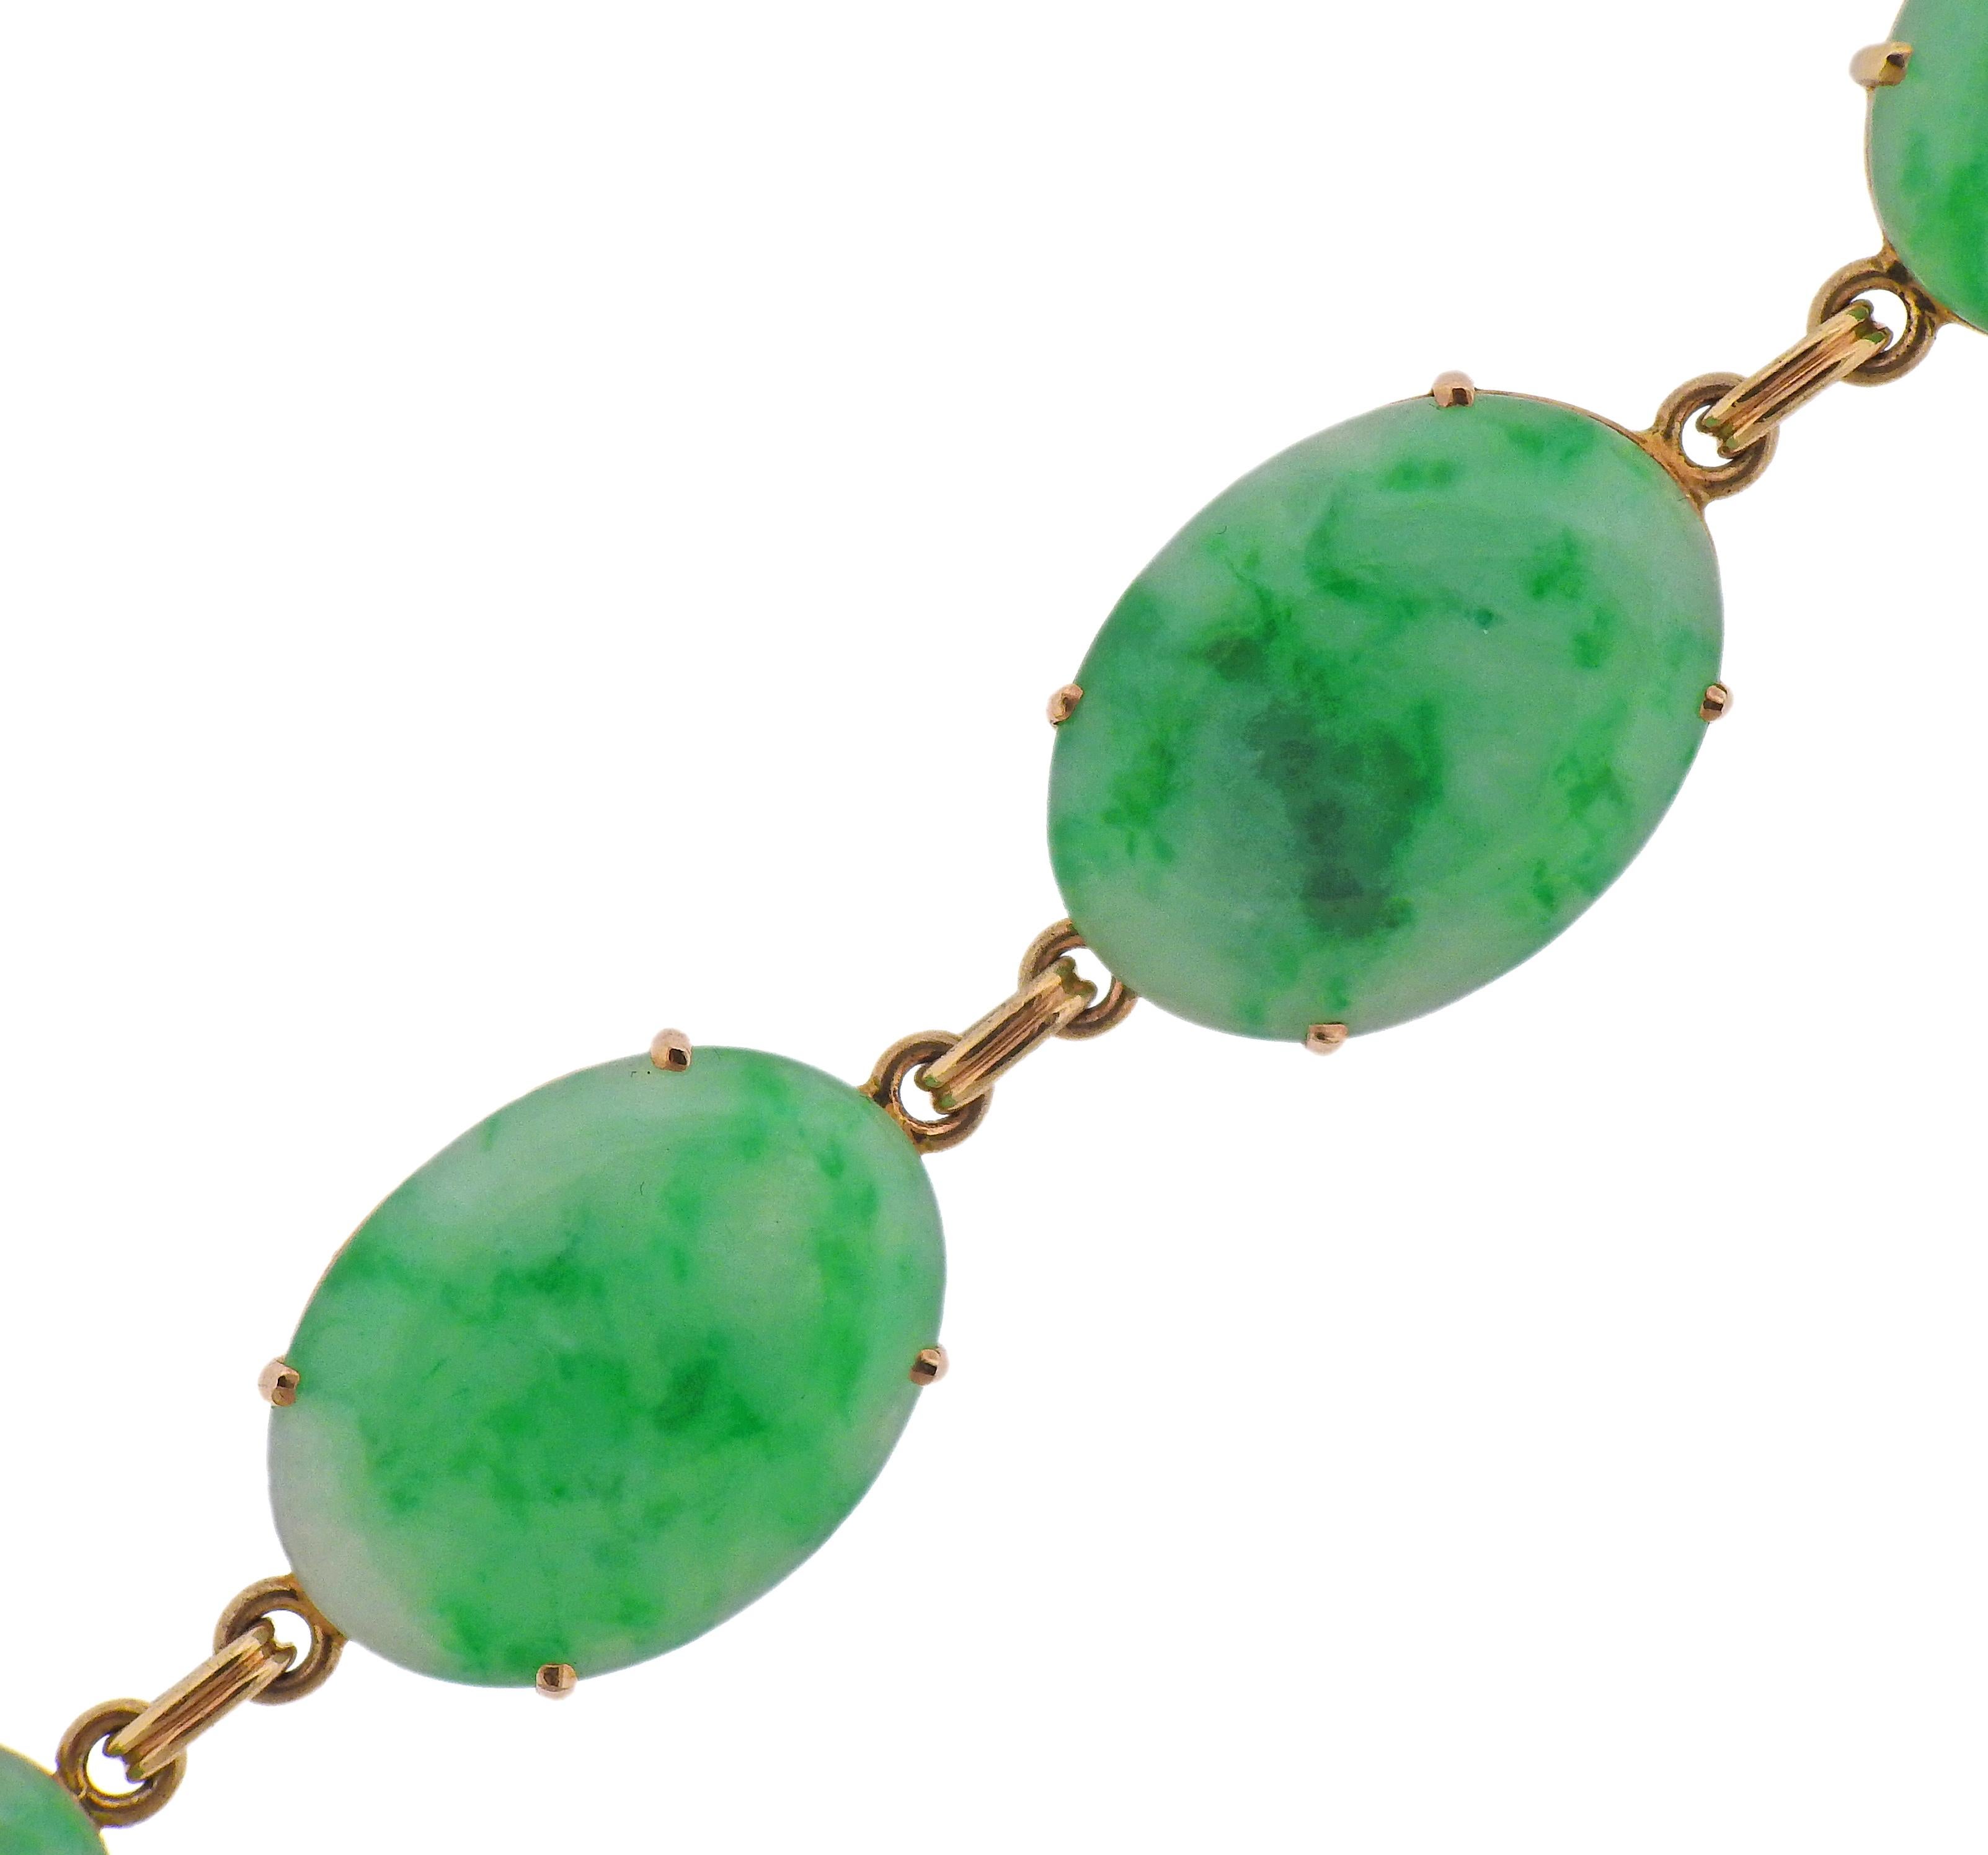 Art Deco 14k gold bracelet by Tiffany & Co, with 6 oval jade stones - measuring from 18 x 14mm to 23 x 17mm. Bracelet is 7 3/8